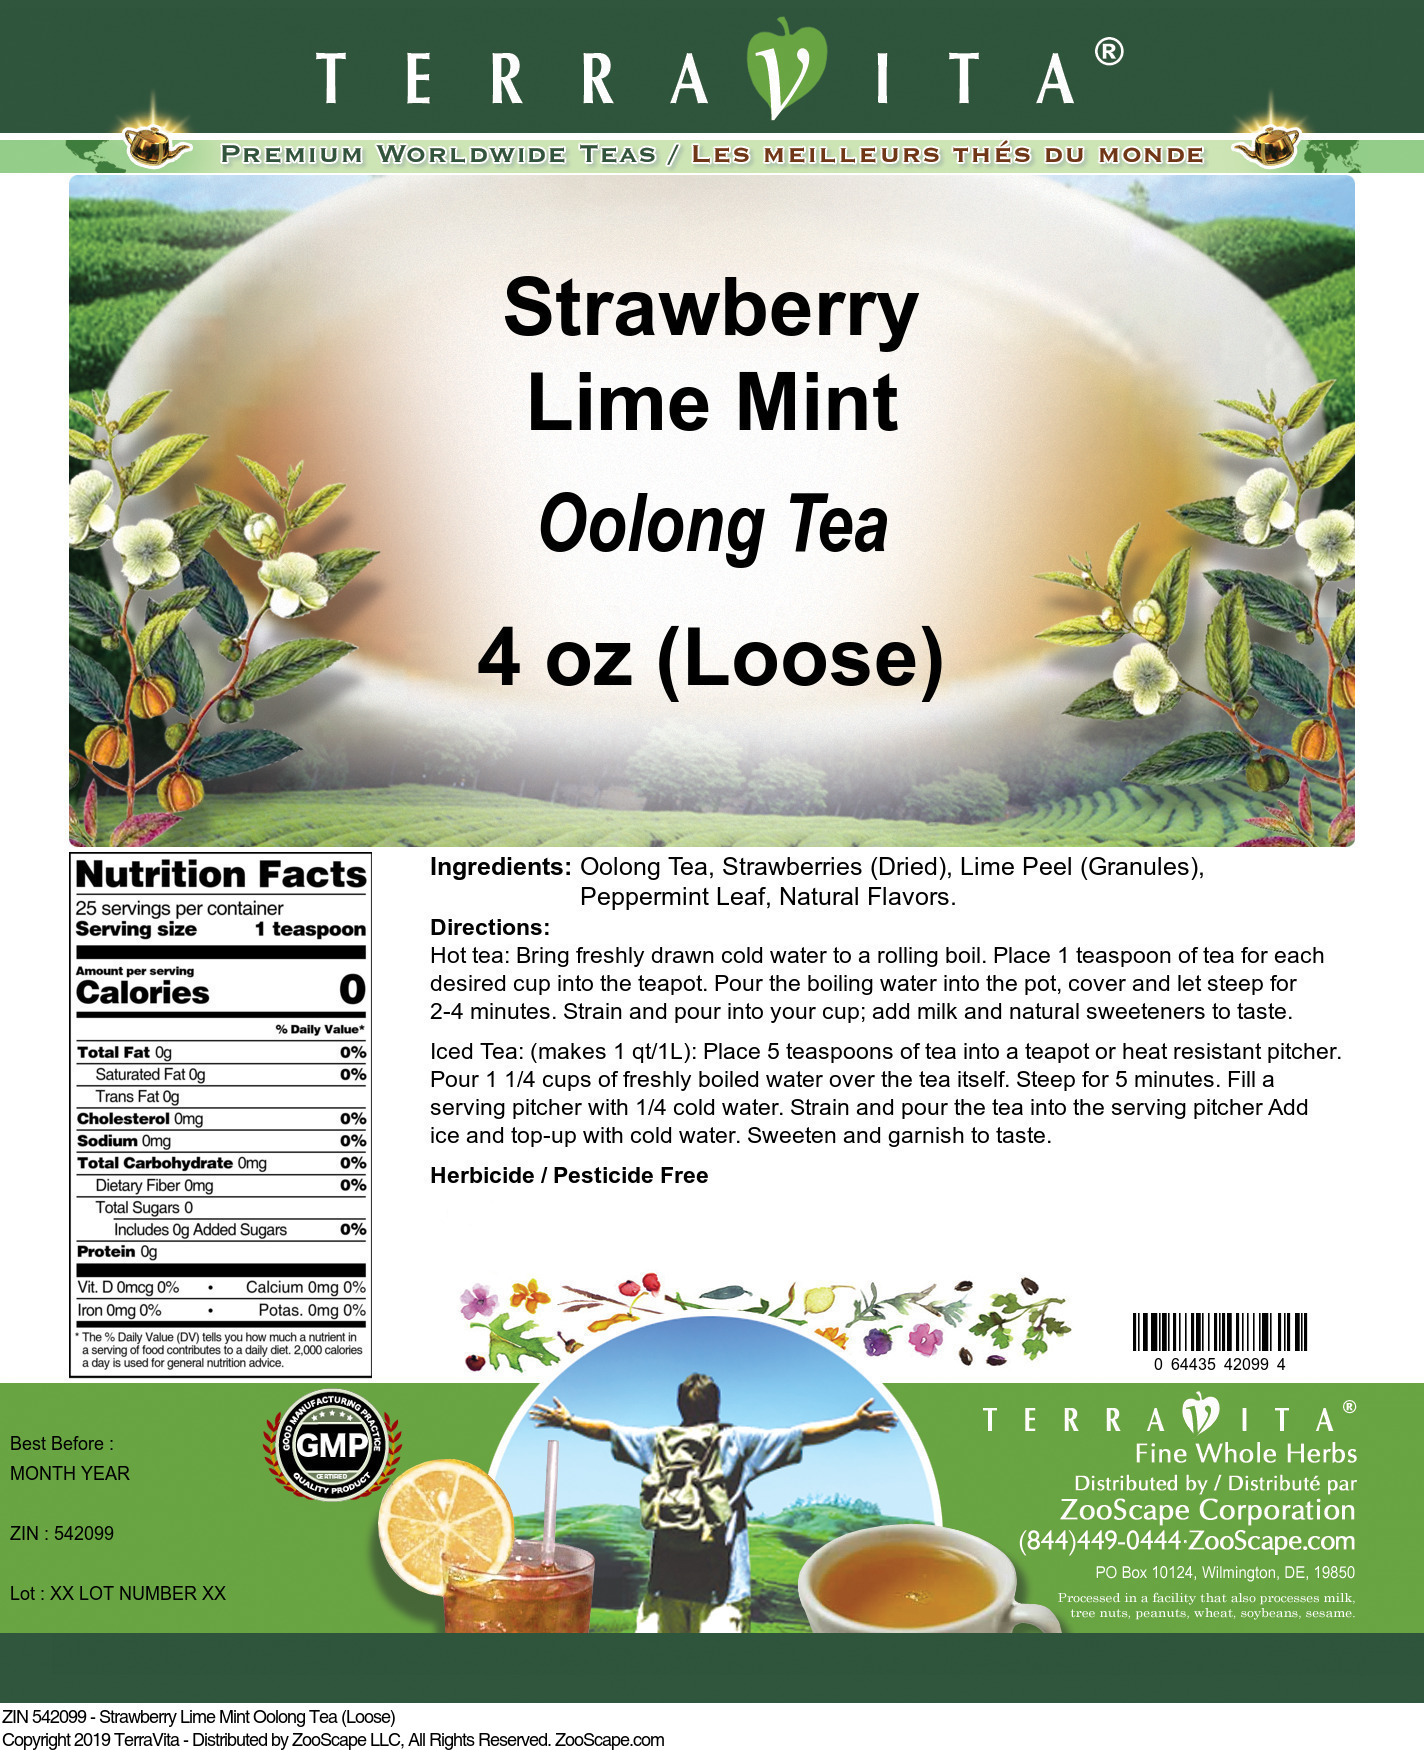 Strawberry Lime Mint Oolong Tea (Loose) - Label